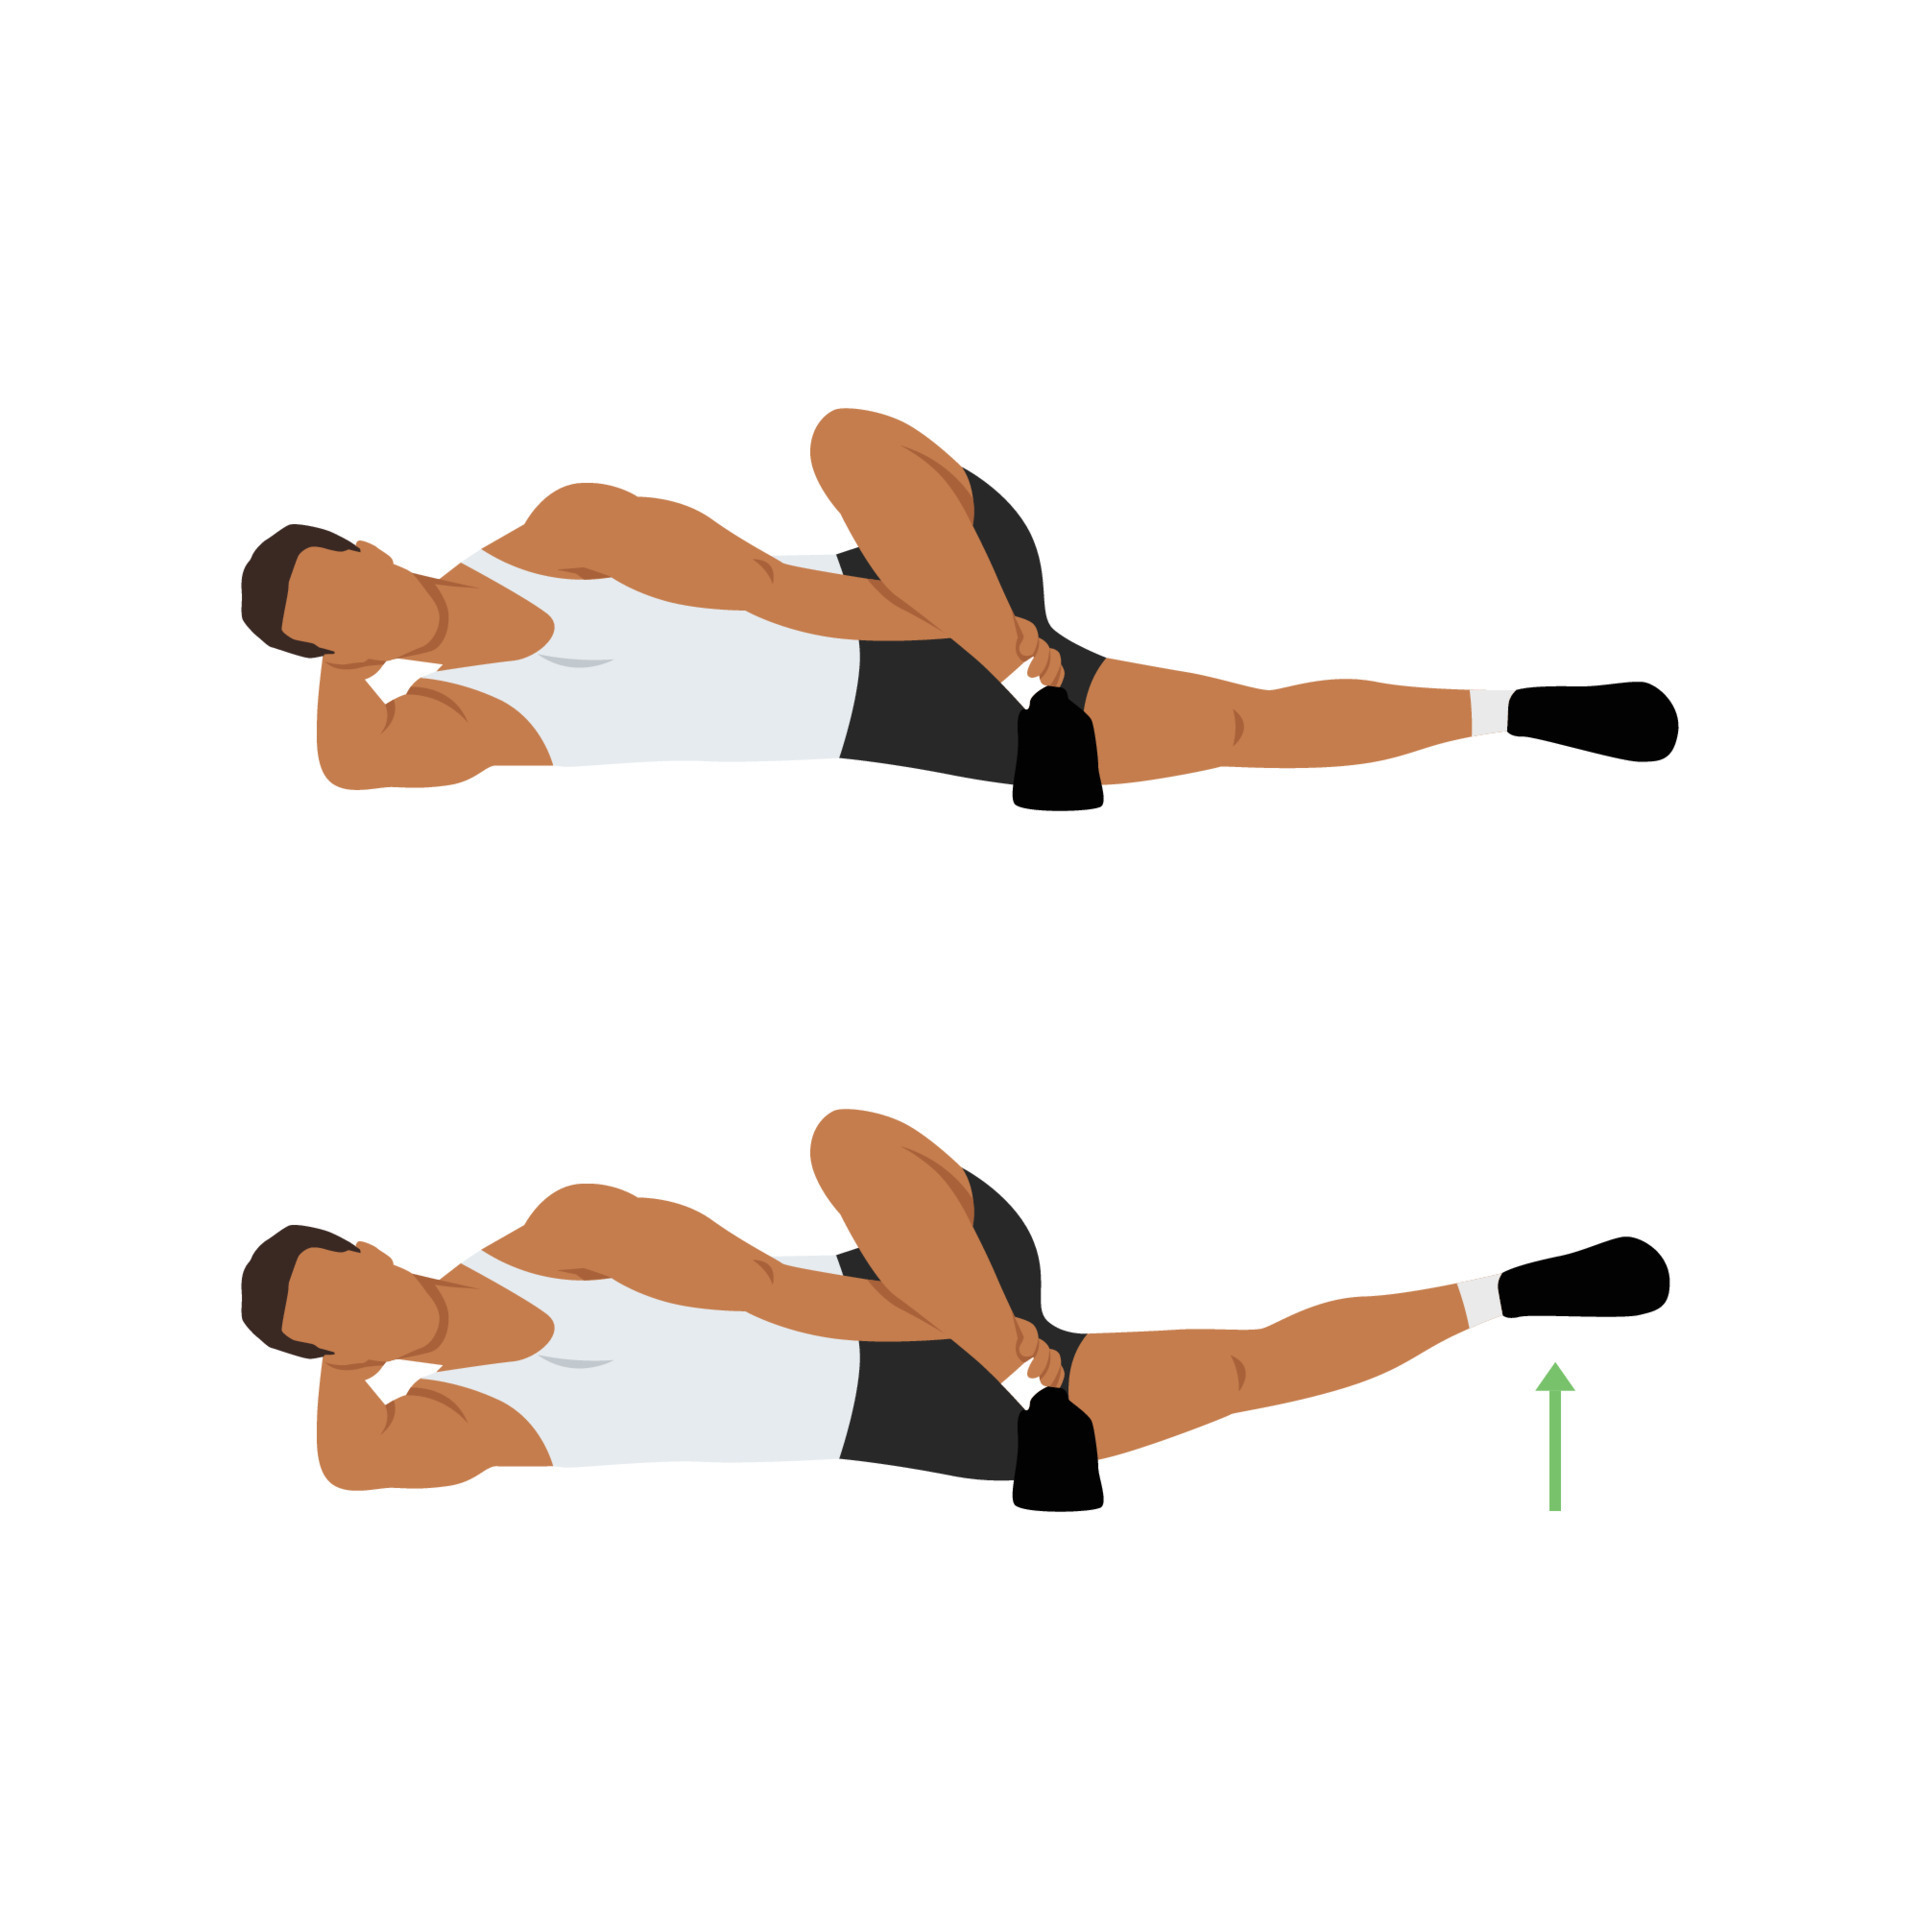 https://static.vecteezy.com/system/resources/previews/016/126/582/original/man-doing-lying-crossover-leg-lift-exercise-in-2-steps-illustration-about-workout-diagram-for-muscles-stretch-leg-thing-hip-flat-illustration-isolated-on-white-background-vector.jpg